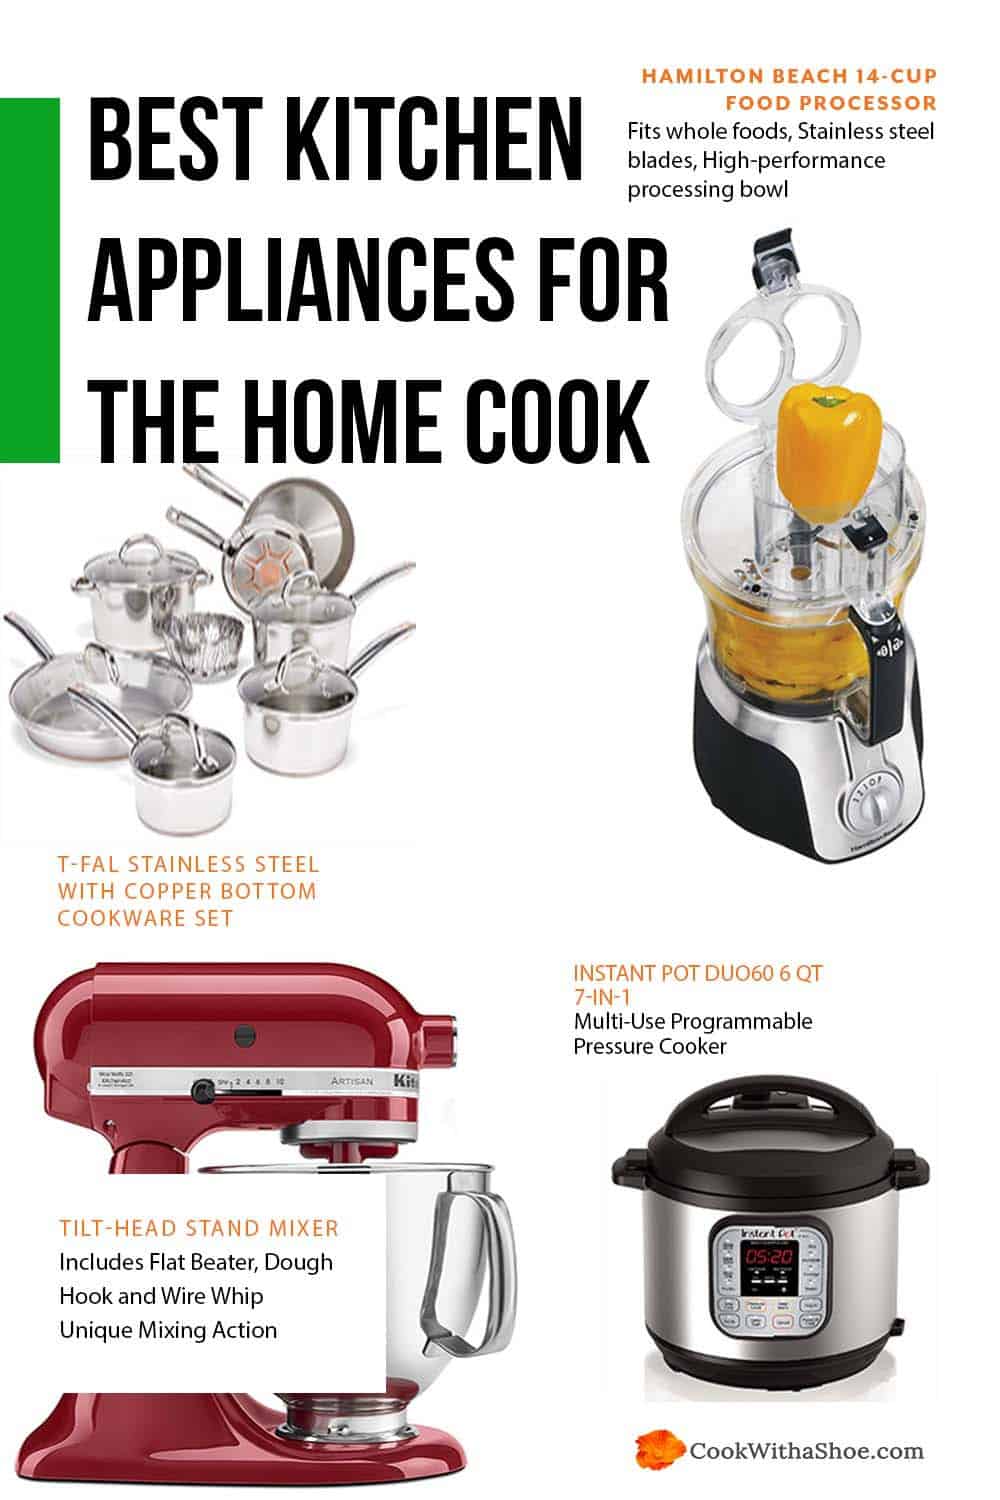 Best Kitchen Appliances for the Home Cook